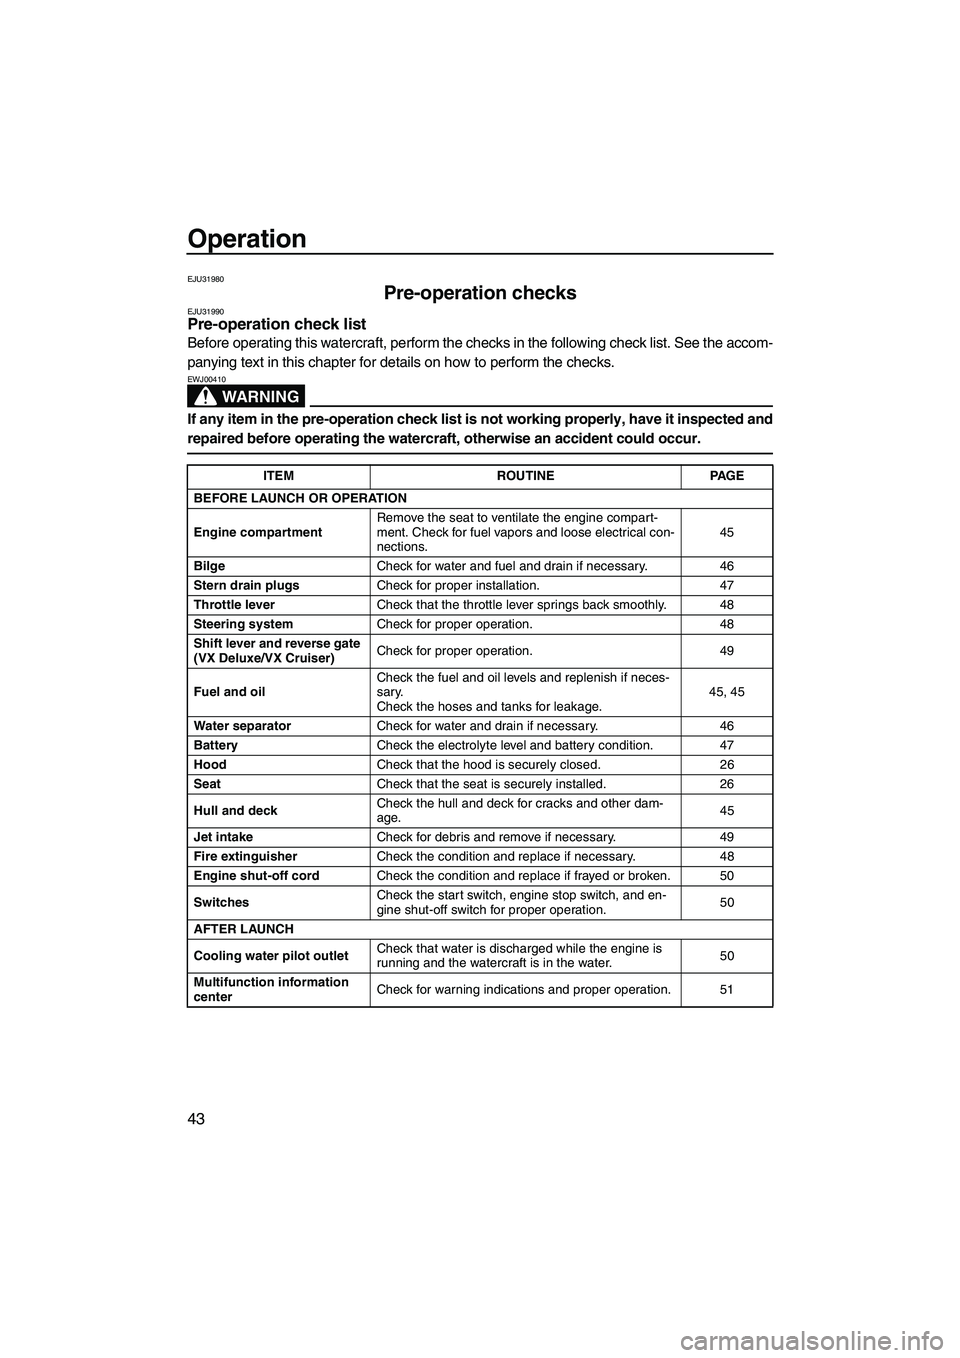 YAMAHA VX SPORT 2007  Owners Manual Operation
43
EJU31980
Pre-operation checks EJU31990Pre-operation check list 
Before operating this watercraft, perform the checks in the following check list. See the accom-
panying text in this chapt